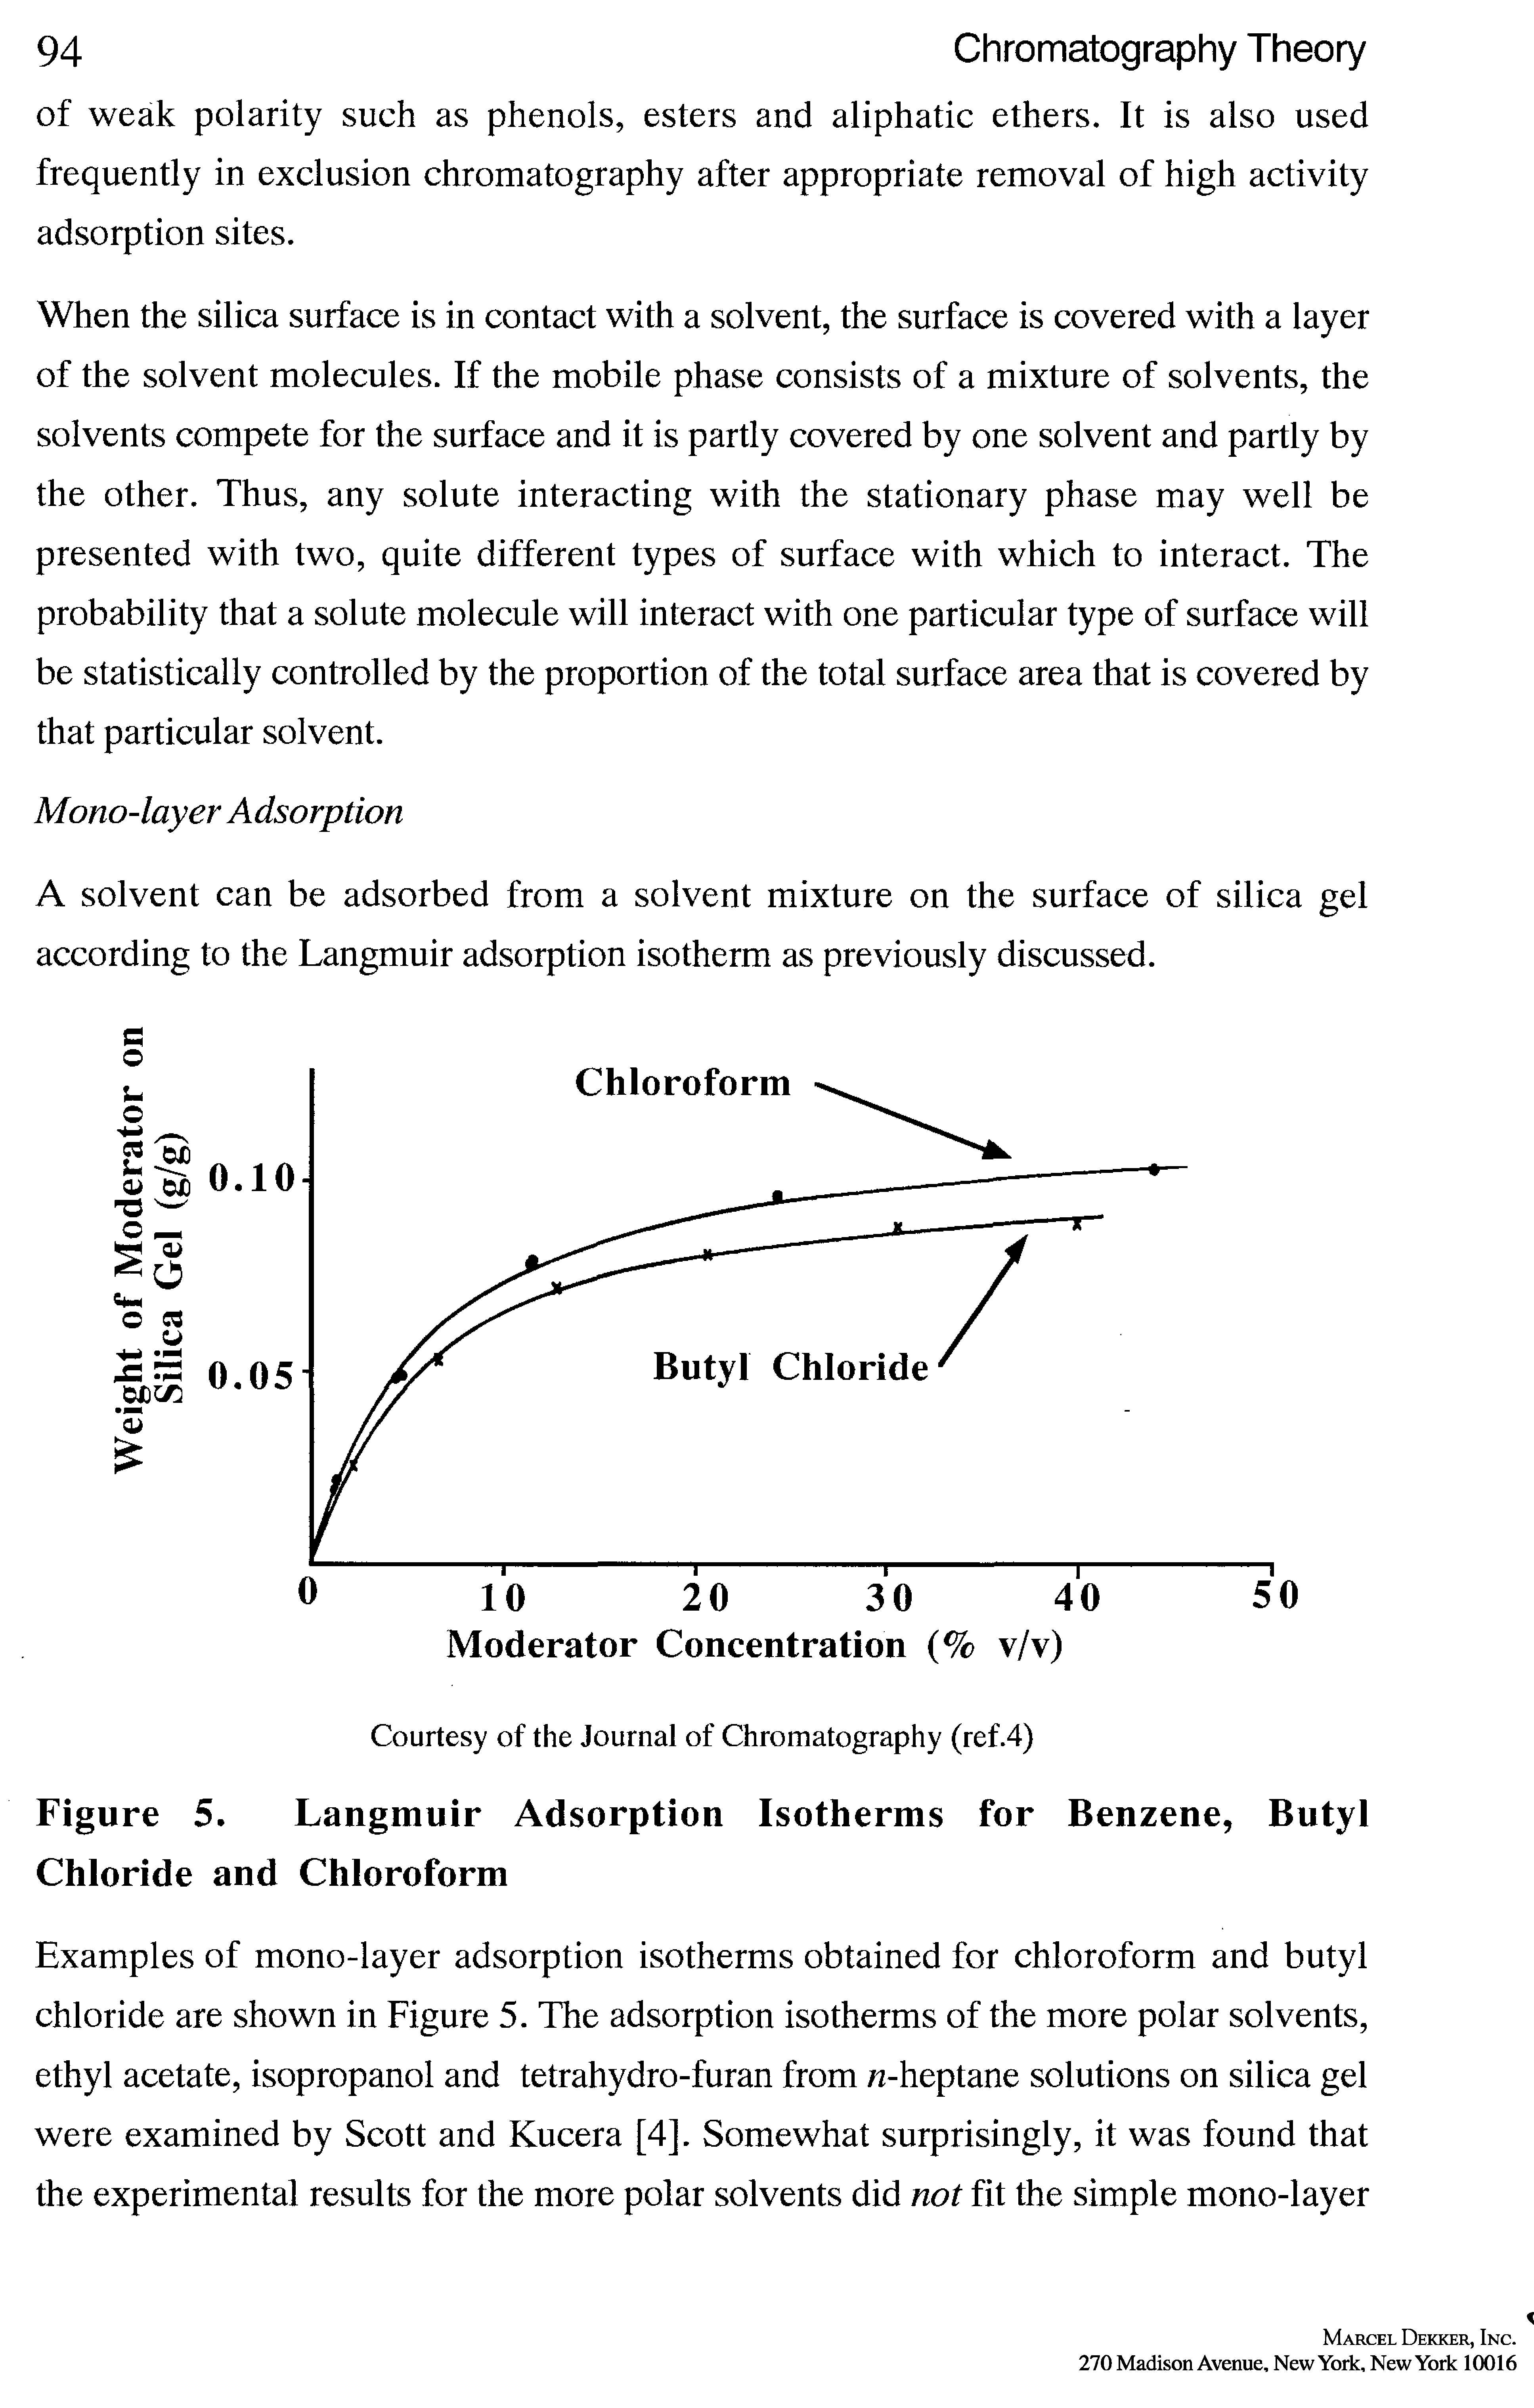 Figure 5. Langmuir Adsorption Isotherms for Benzene, Butyl Chloride and Chloroform...